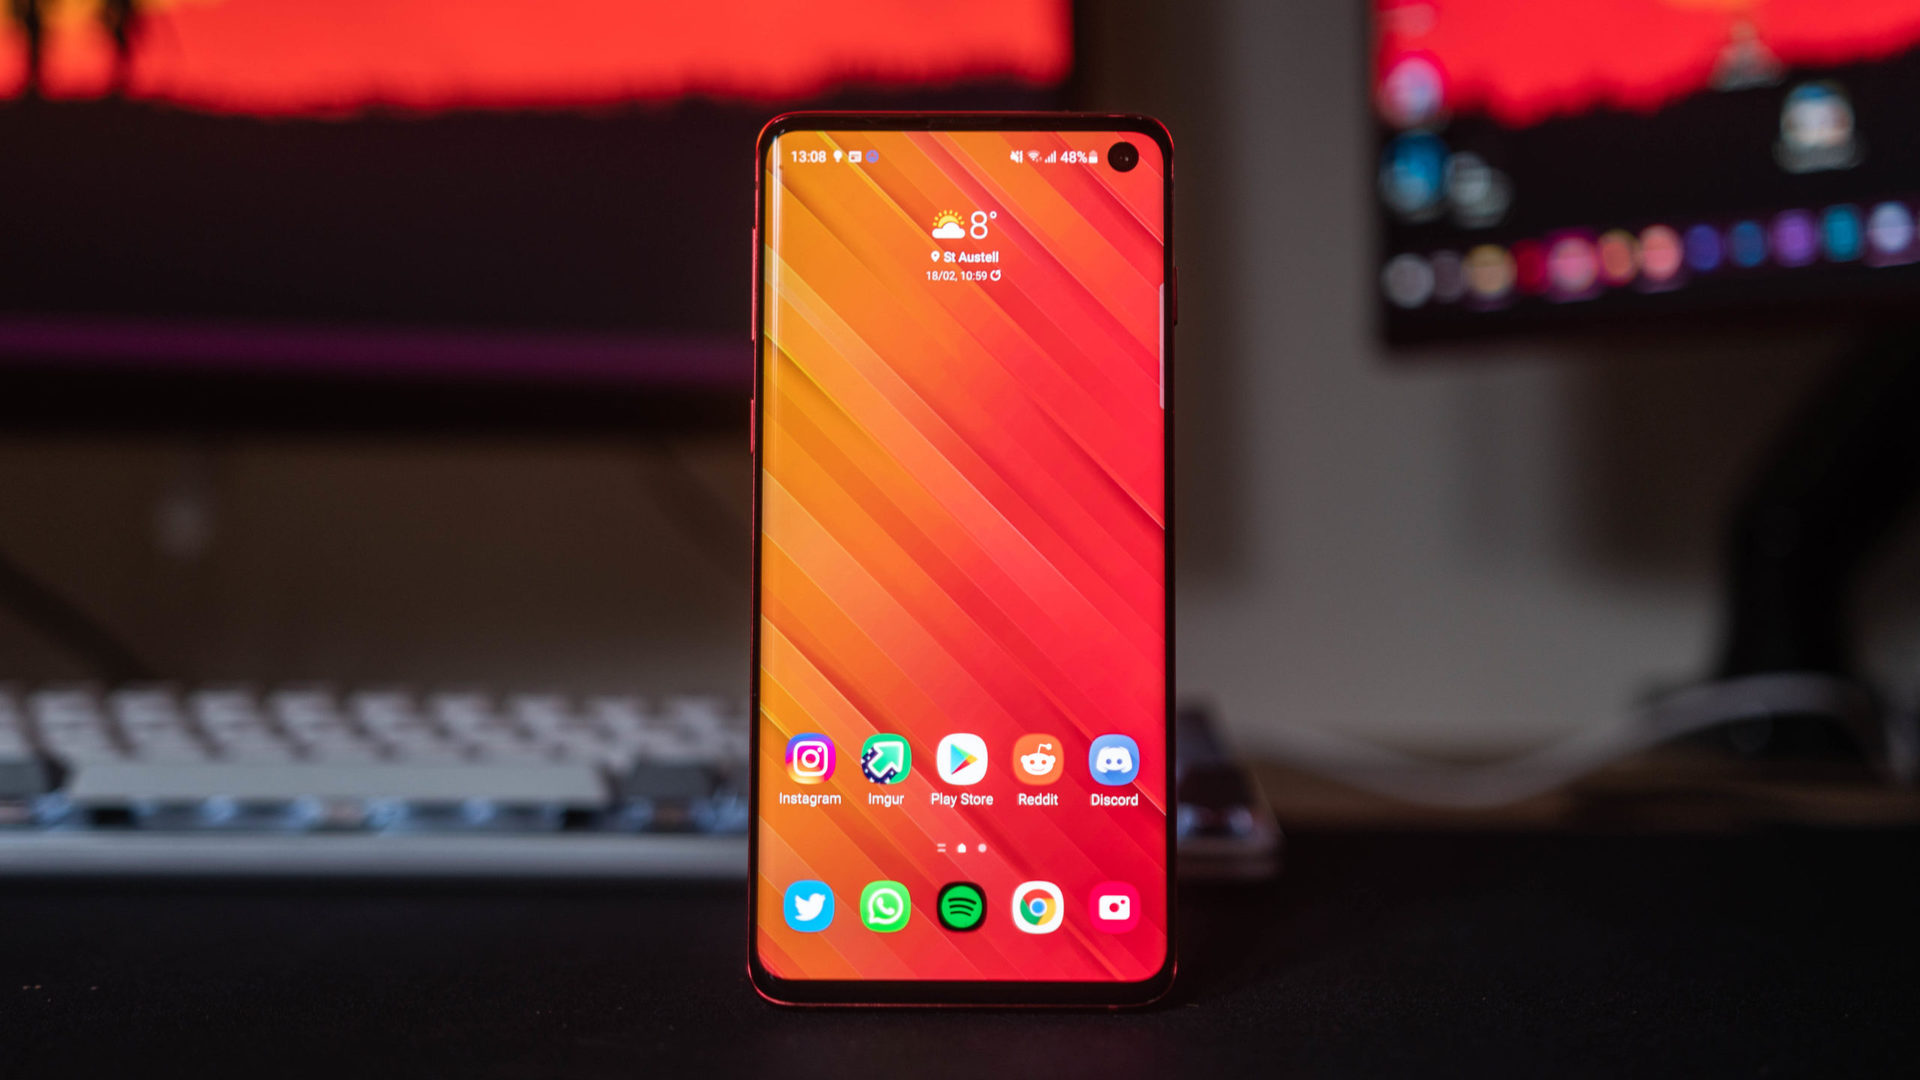 Samsung Galaxy S10 standing upright showing the home screen and app icons.